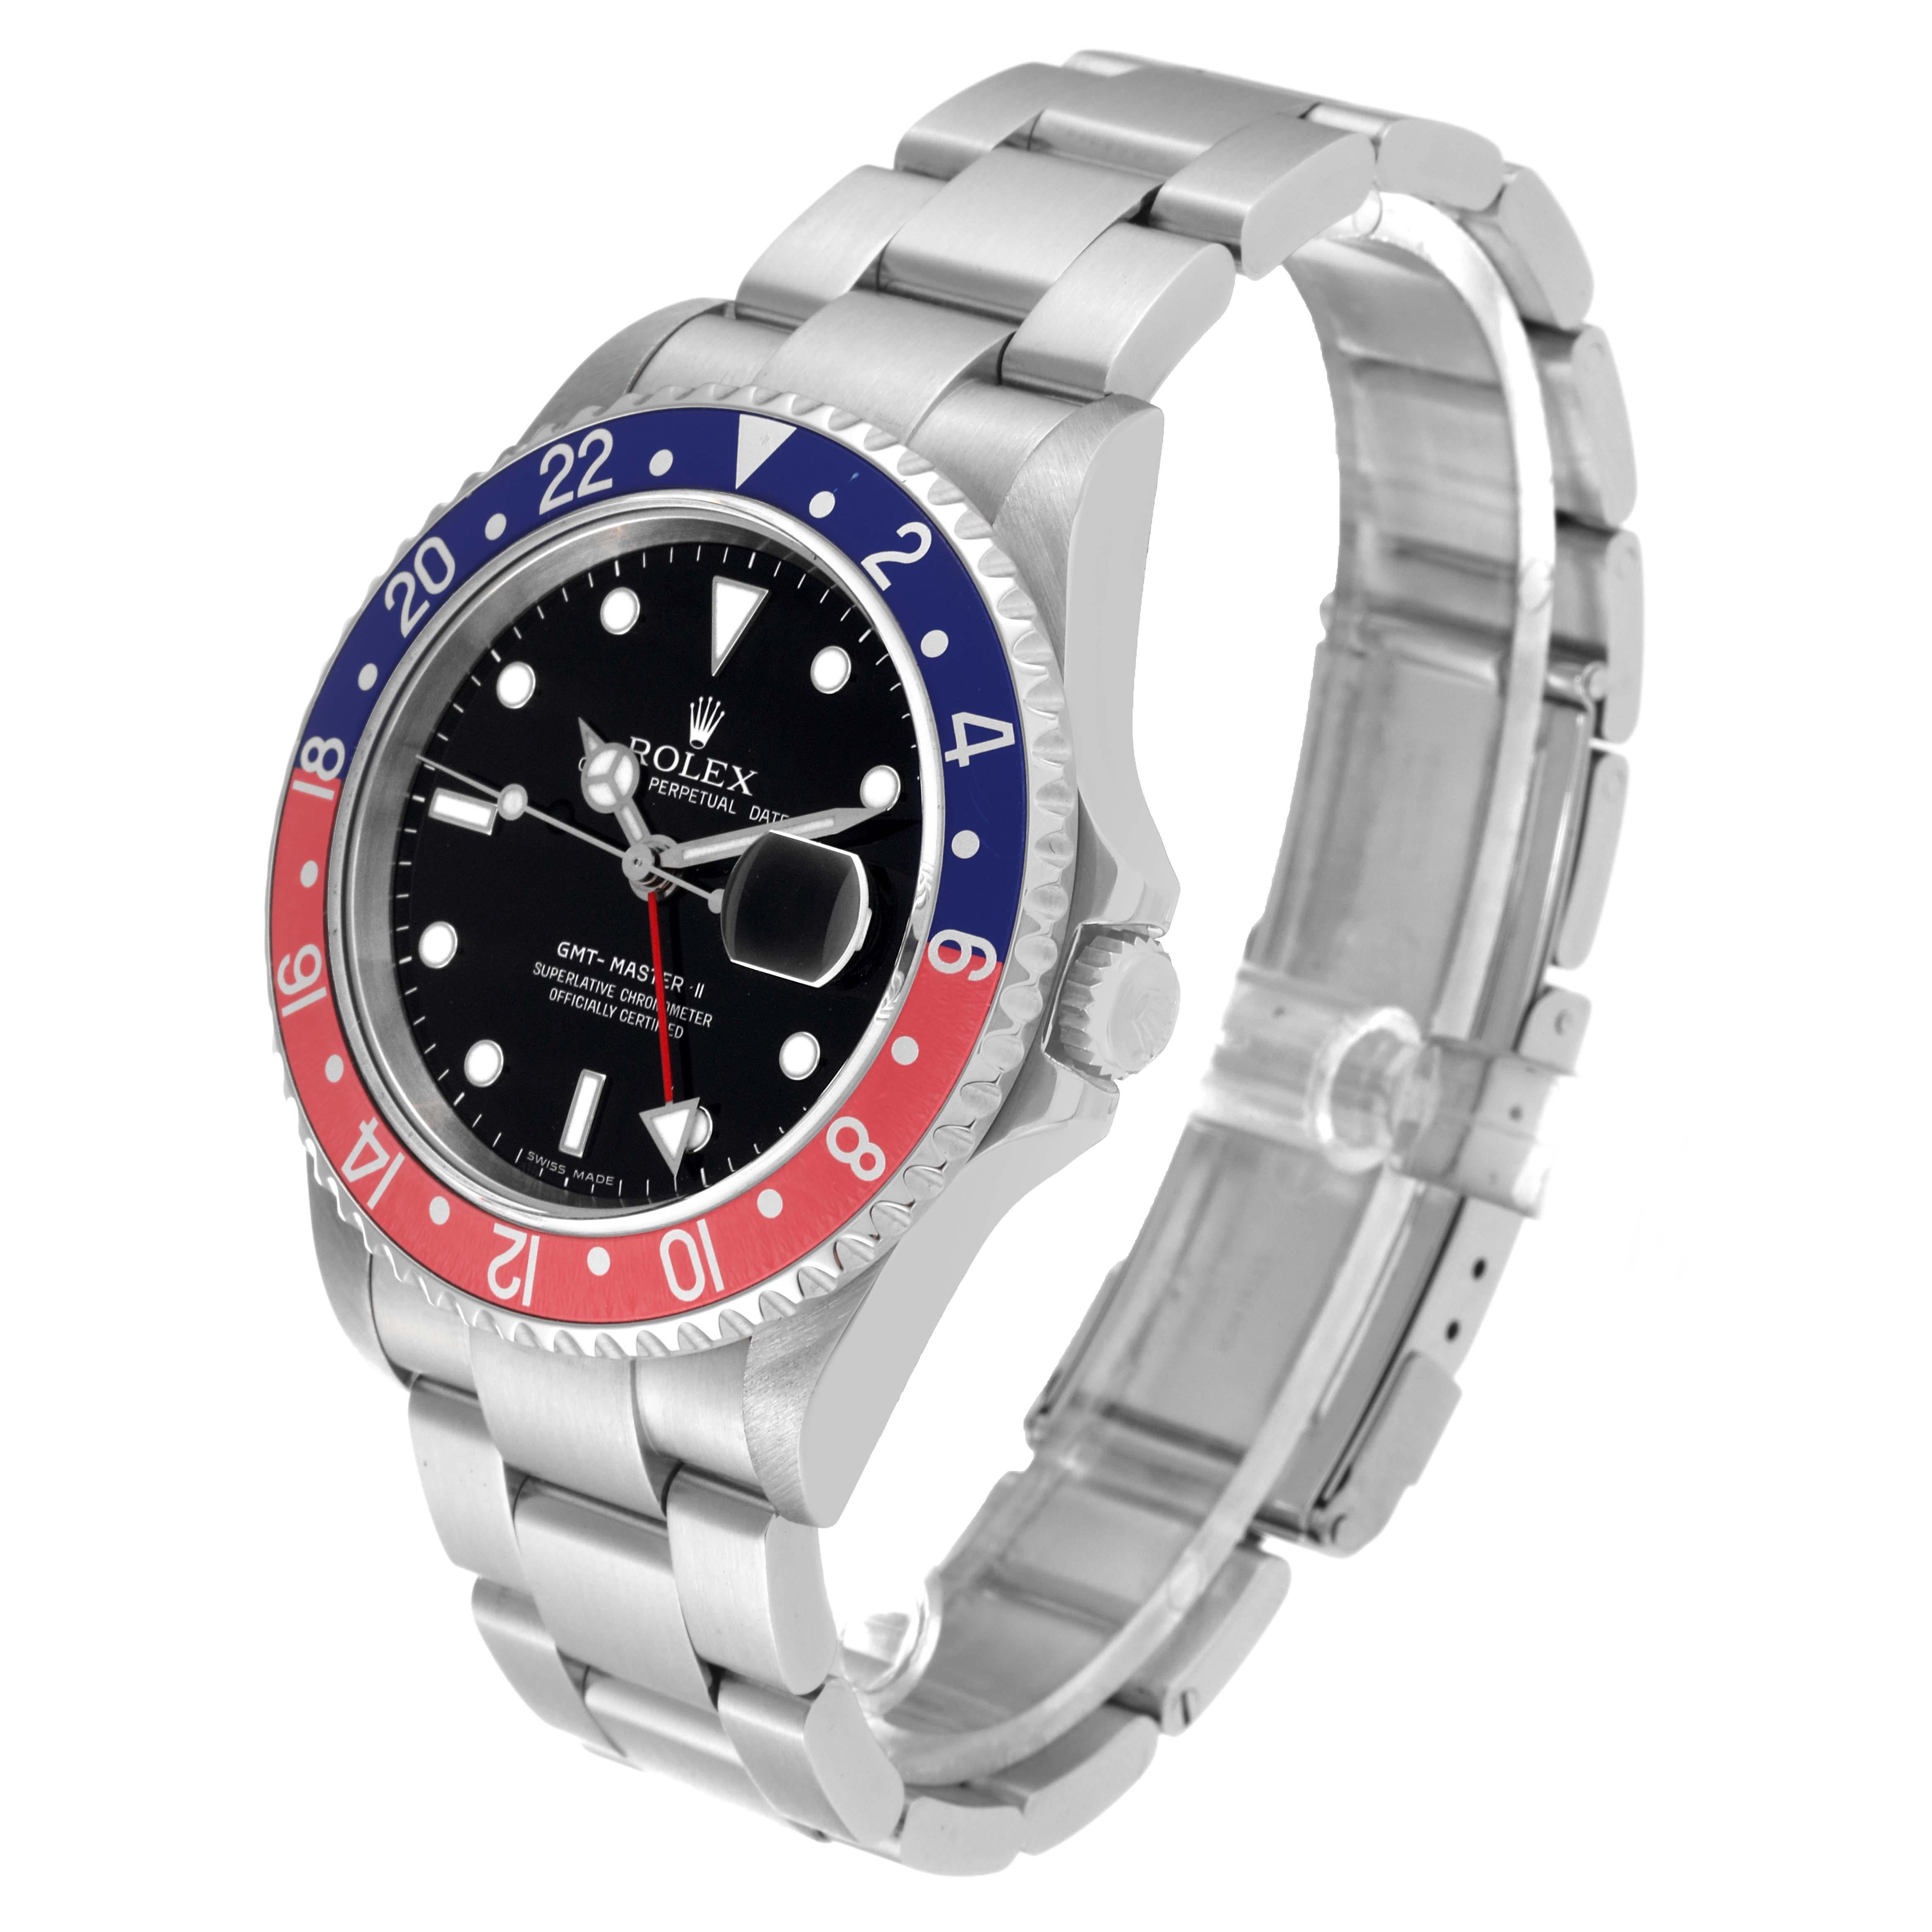 Rolex GMT Master II Blue Red Pepsi Error Dial Steel Mens Watch 16710 Box Papers 5